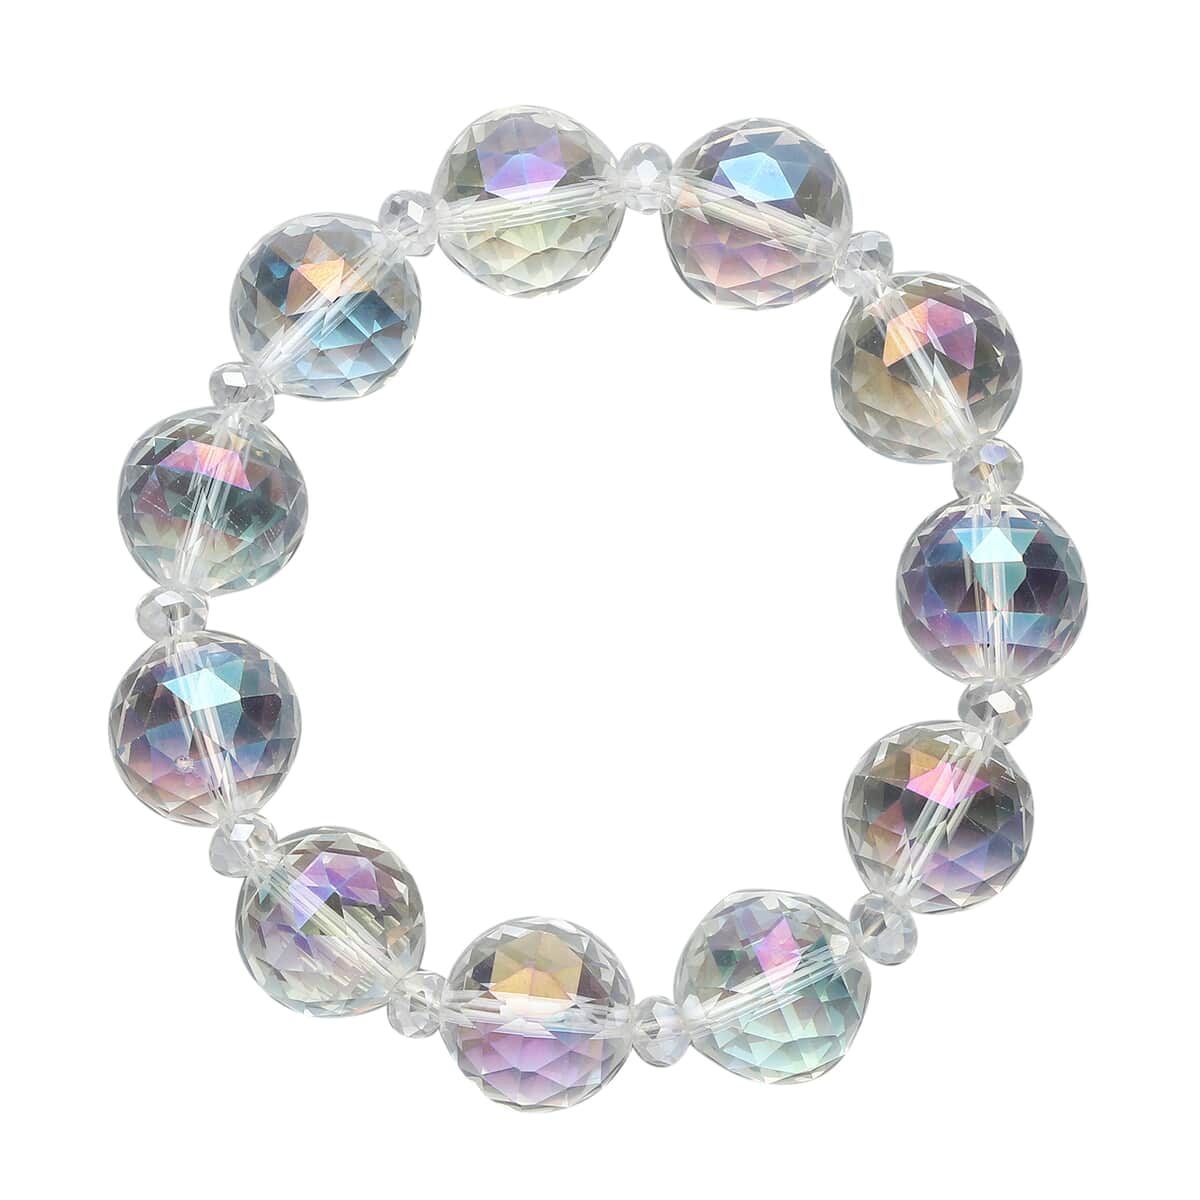 simulated-mystic-quartz-beaded-bracelet-7-7.5in-and-drop-earrings-in-silvertone image number 2